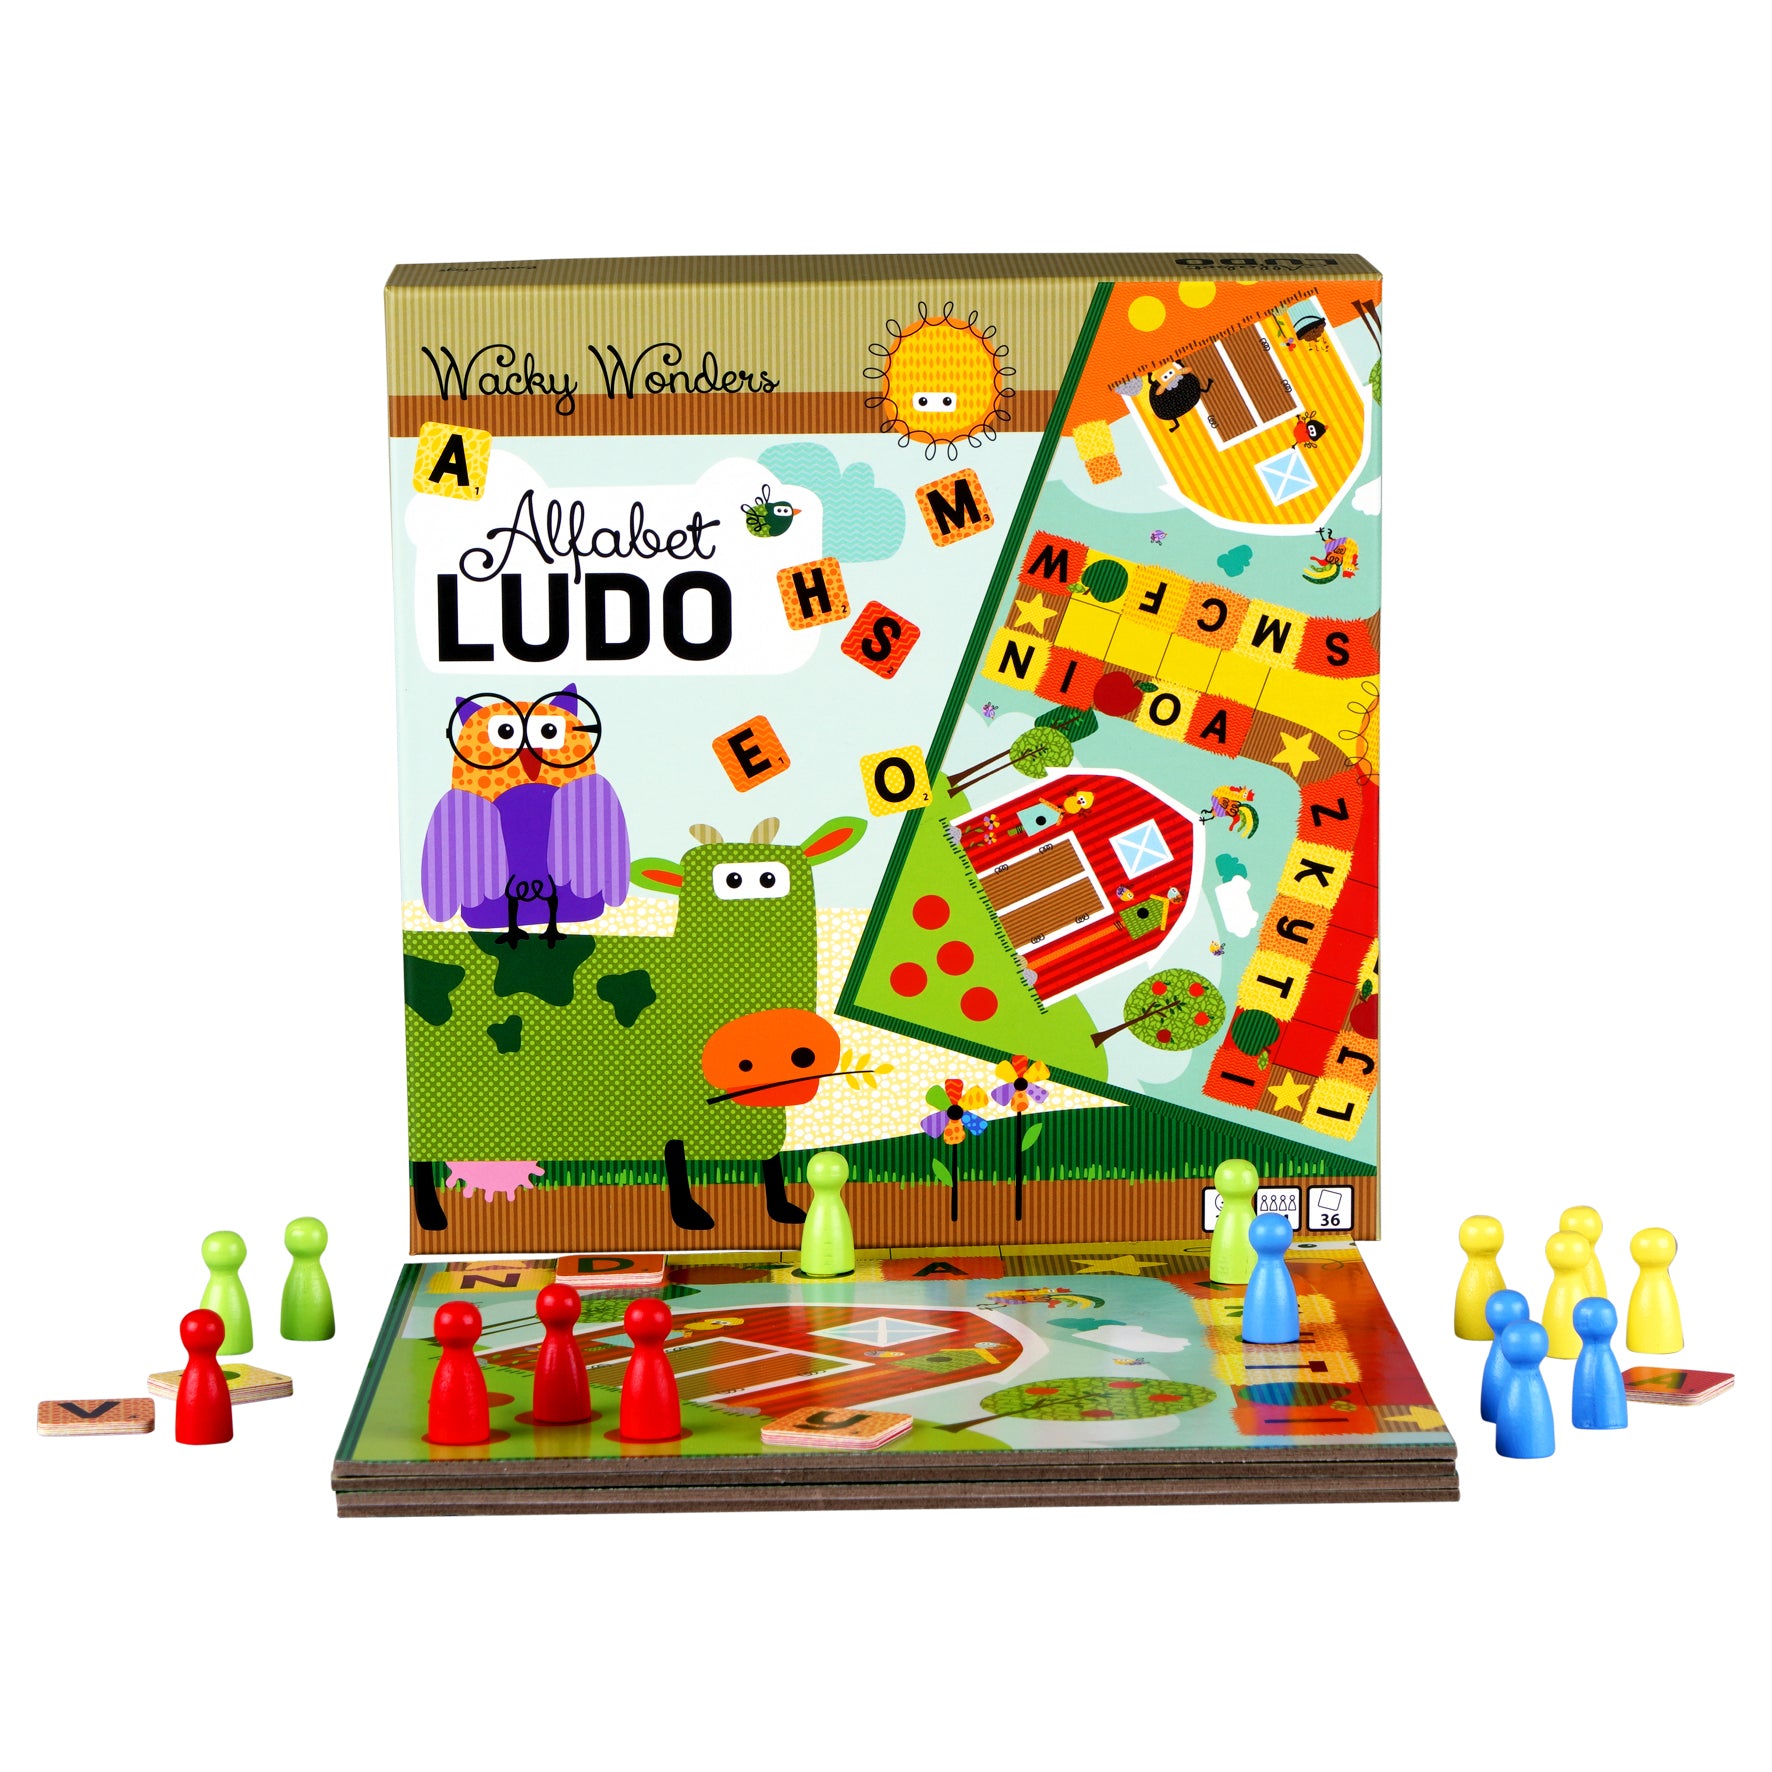 alfabet ludo box game with board and game pieces